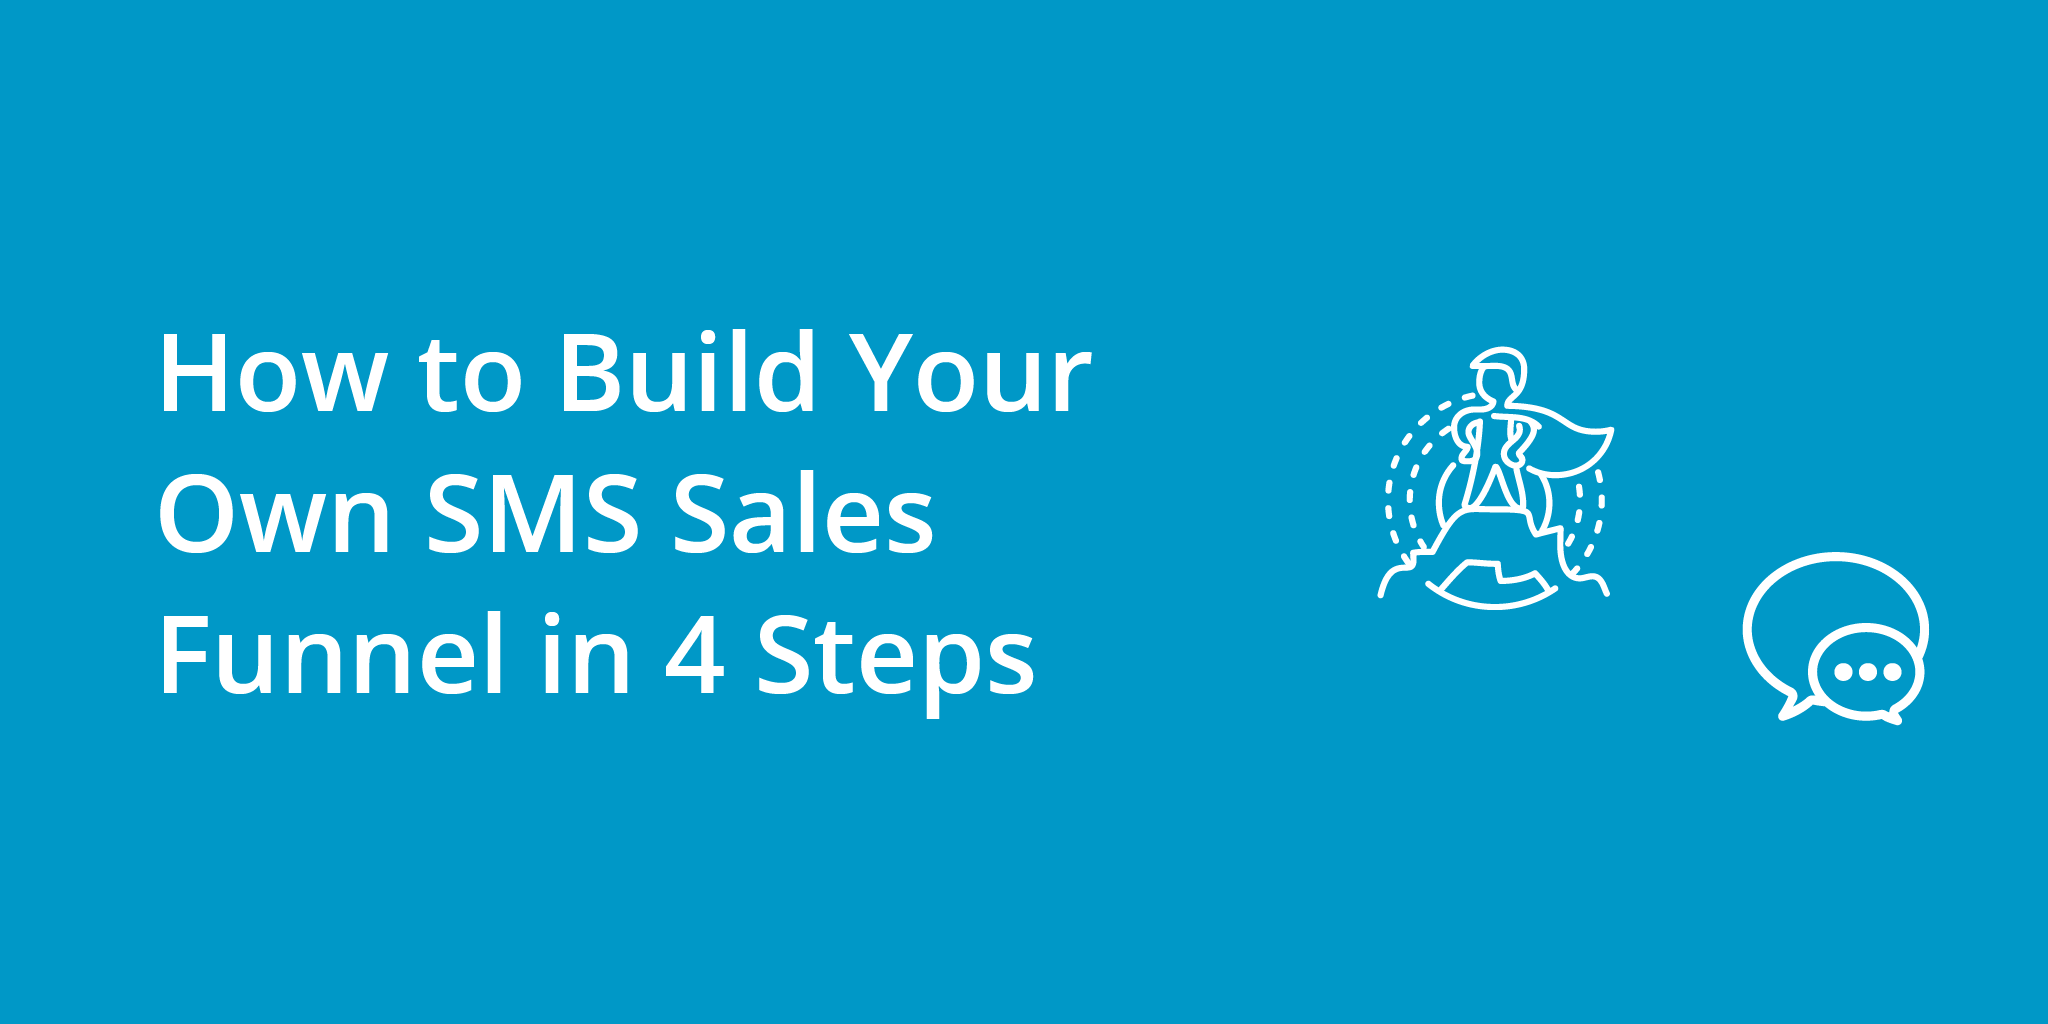 How to Build Your Own SMS Sales Funnel in 4 Steps